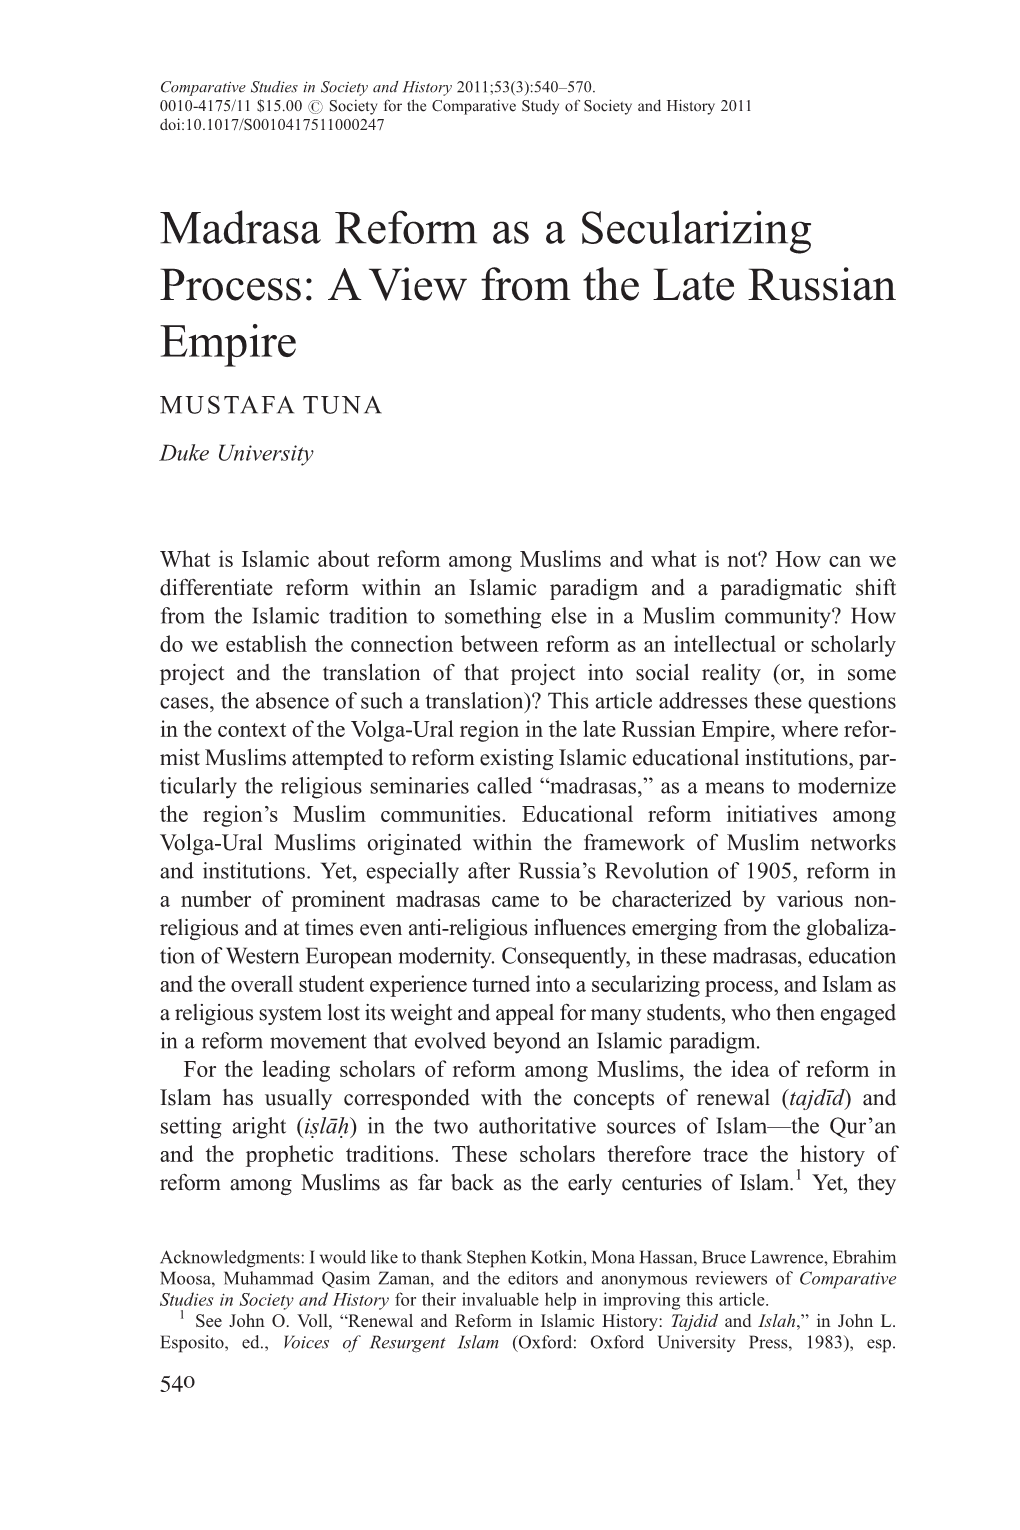 Madrasa Reform As a Secularizing Process: a View from the Late Russian Empire